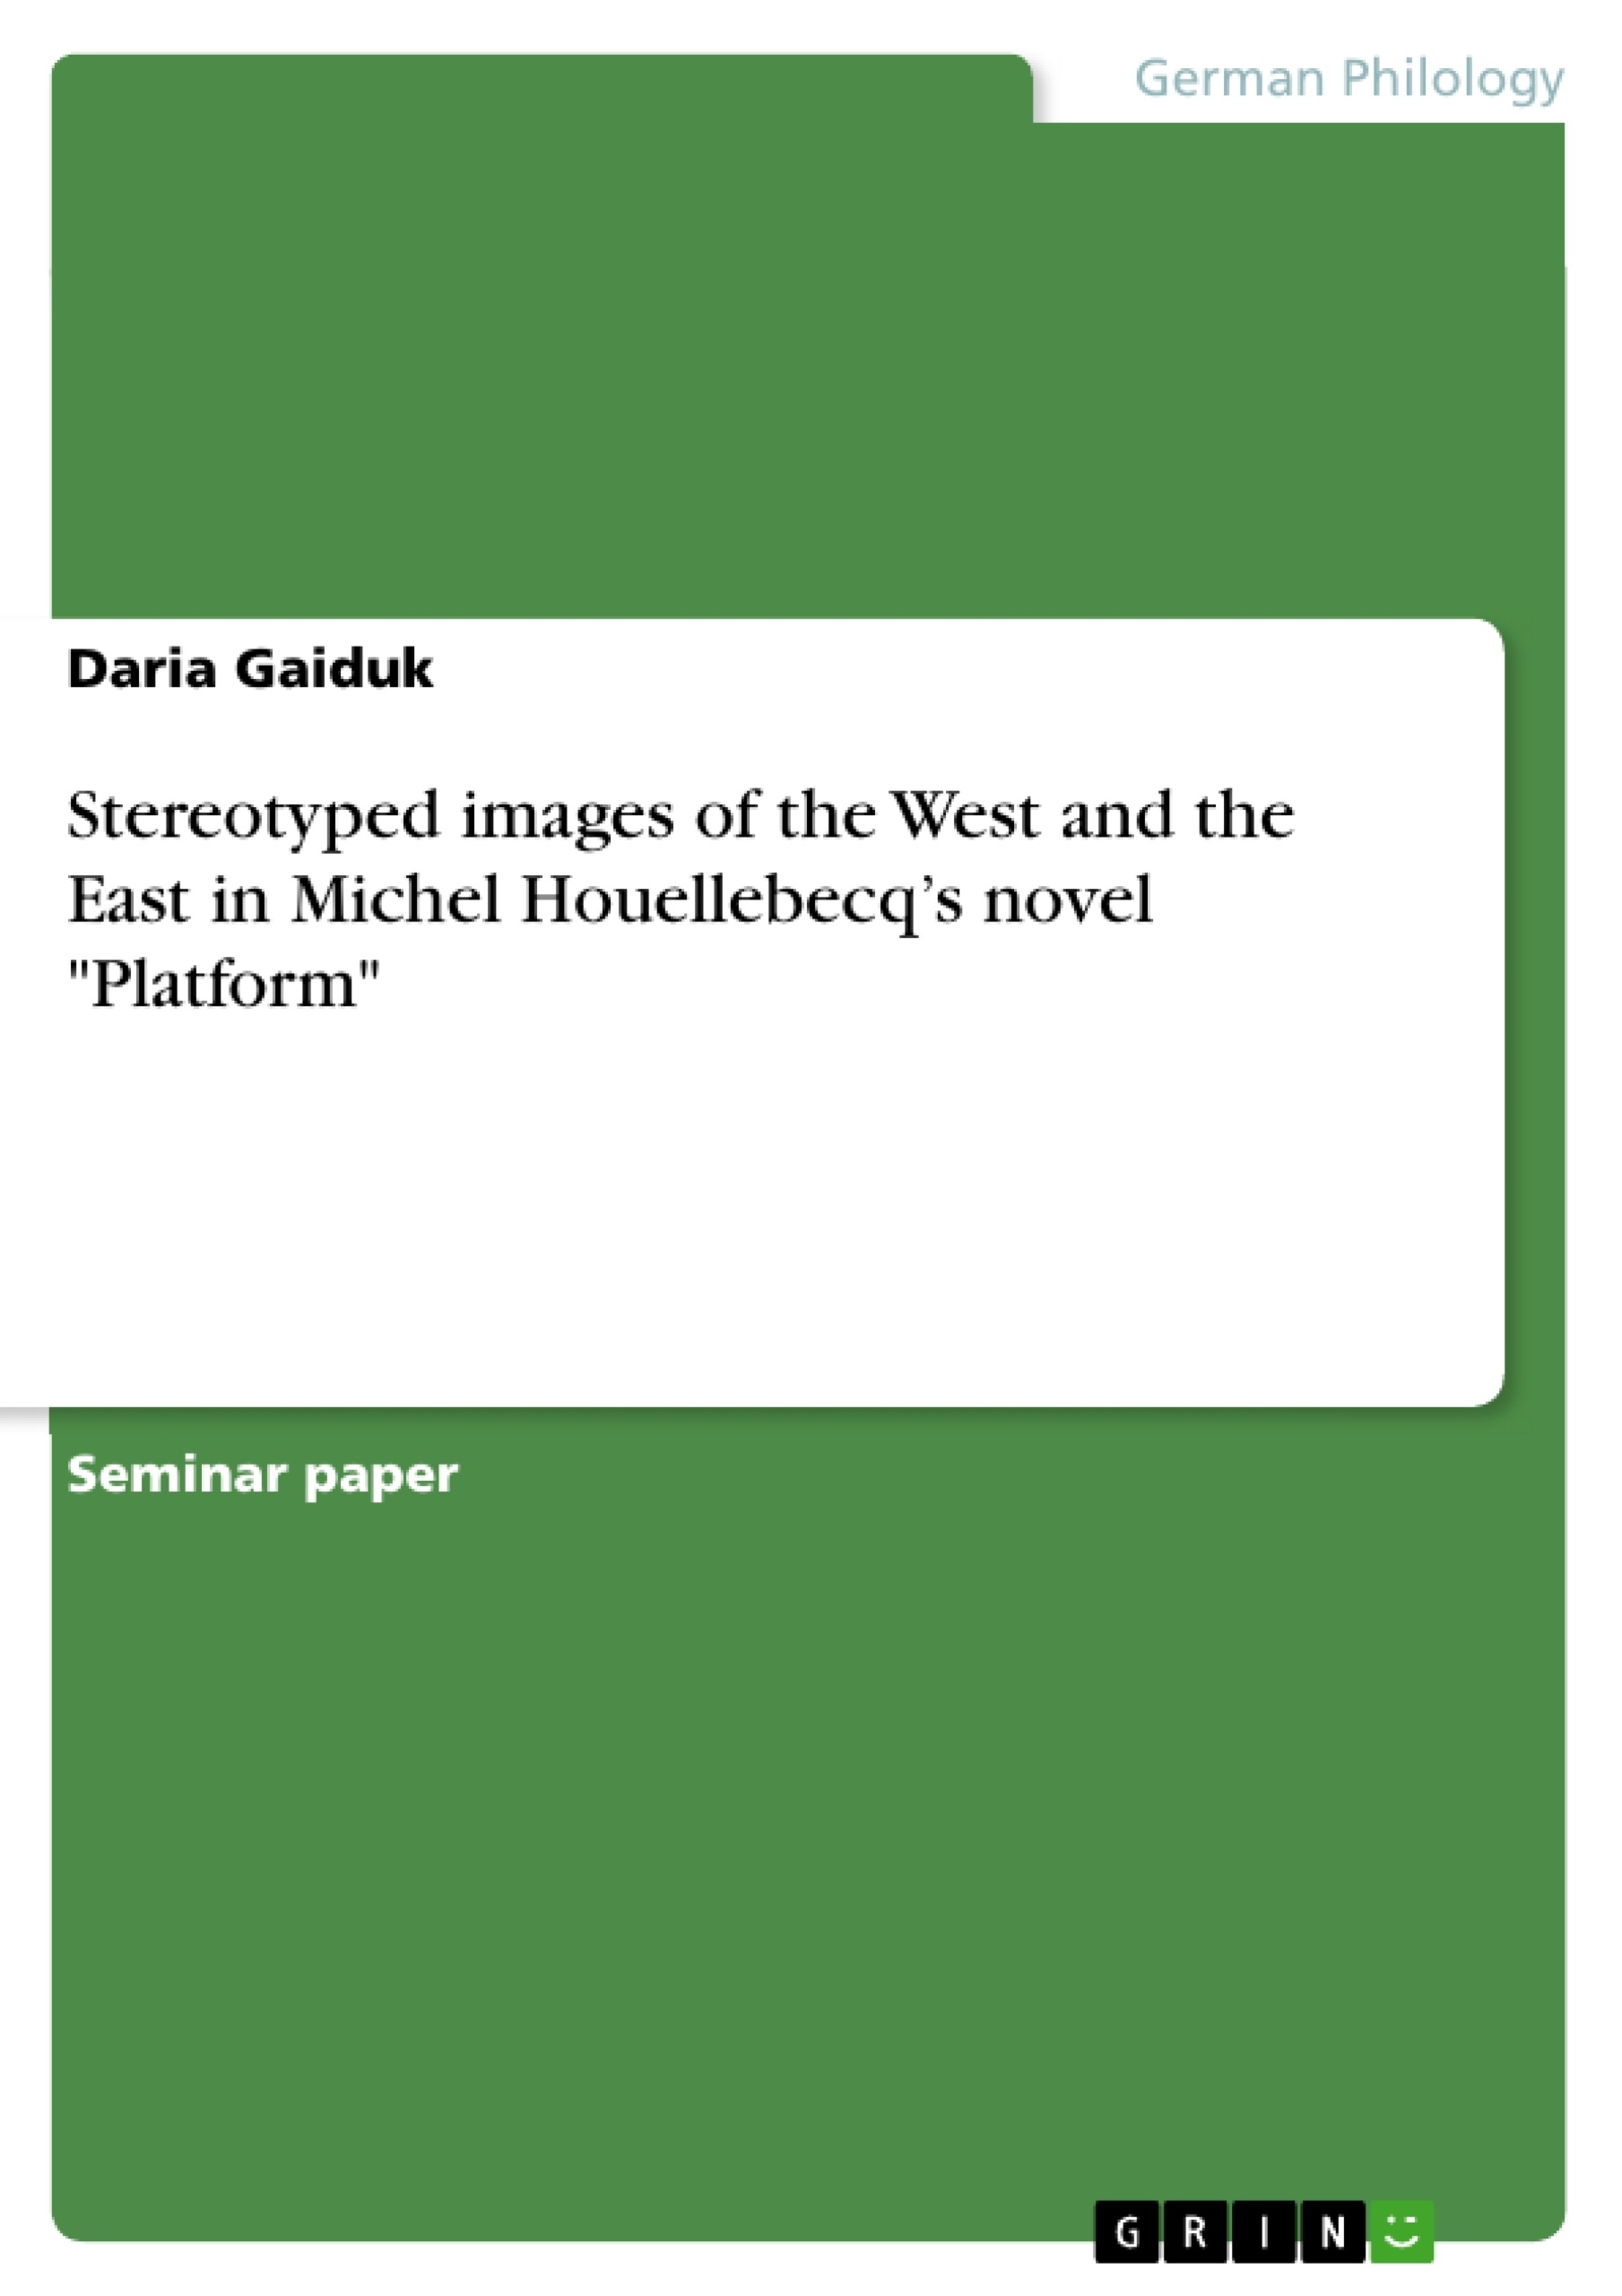 Title: Stereotyped images of the West and the East  in Michel Houellebecq’s novel "Platform"